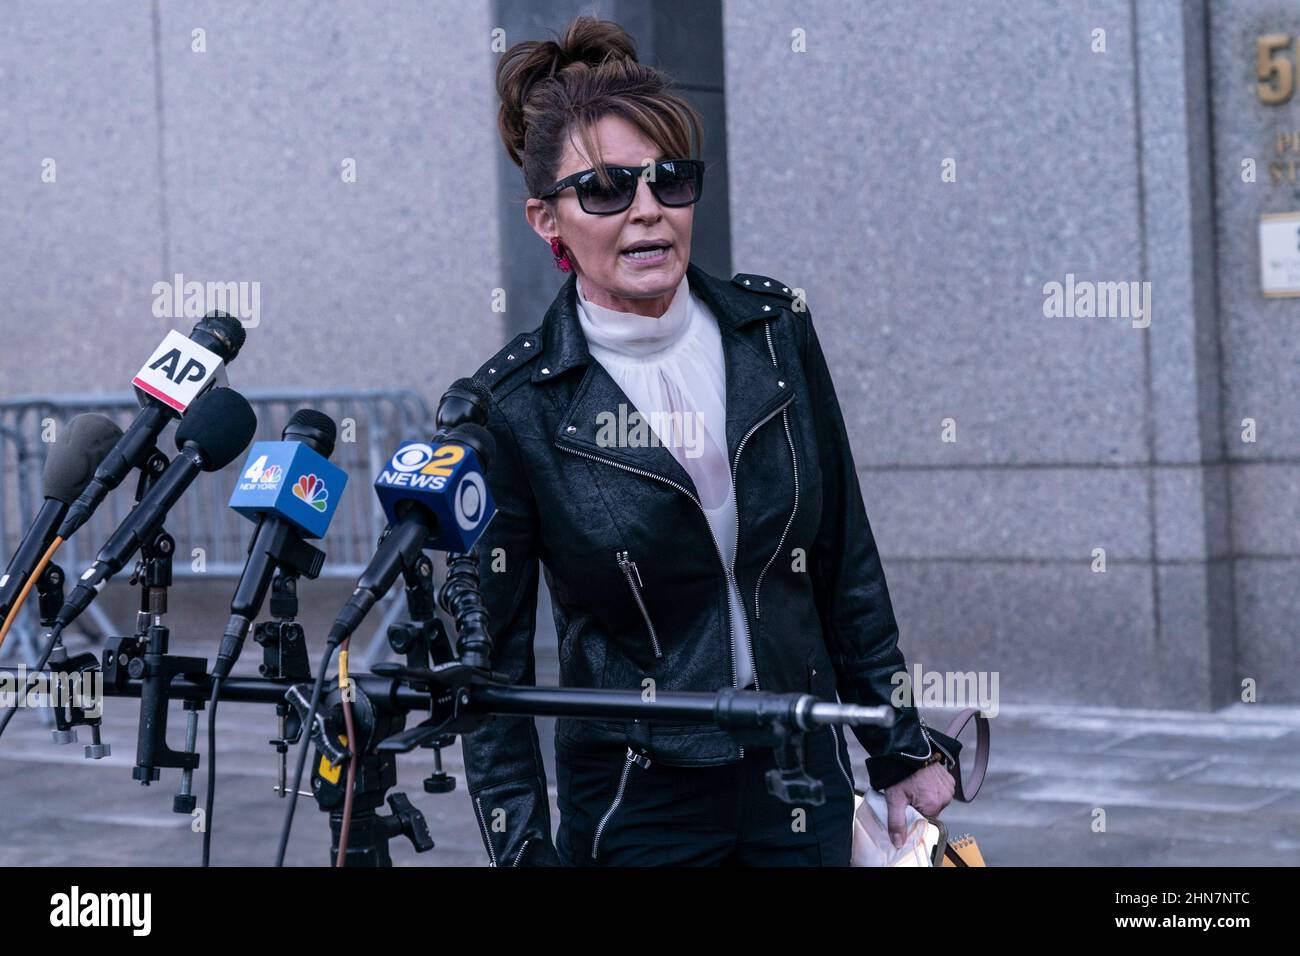 New York, NY - February 14, 2022: Sarah Palin, former Governor of Alaska leaves court after judge Jed Rakoff dismissed her libel case at U.S. Southern District Court Stock Photo